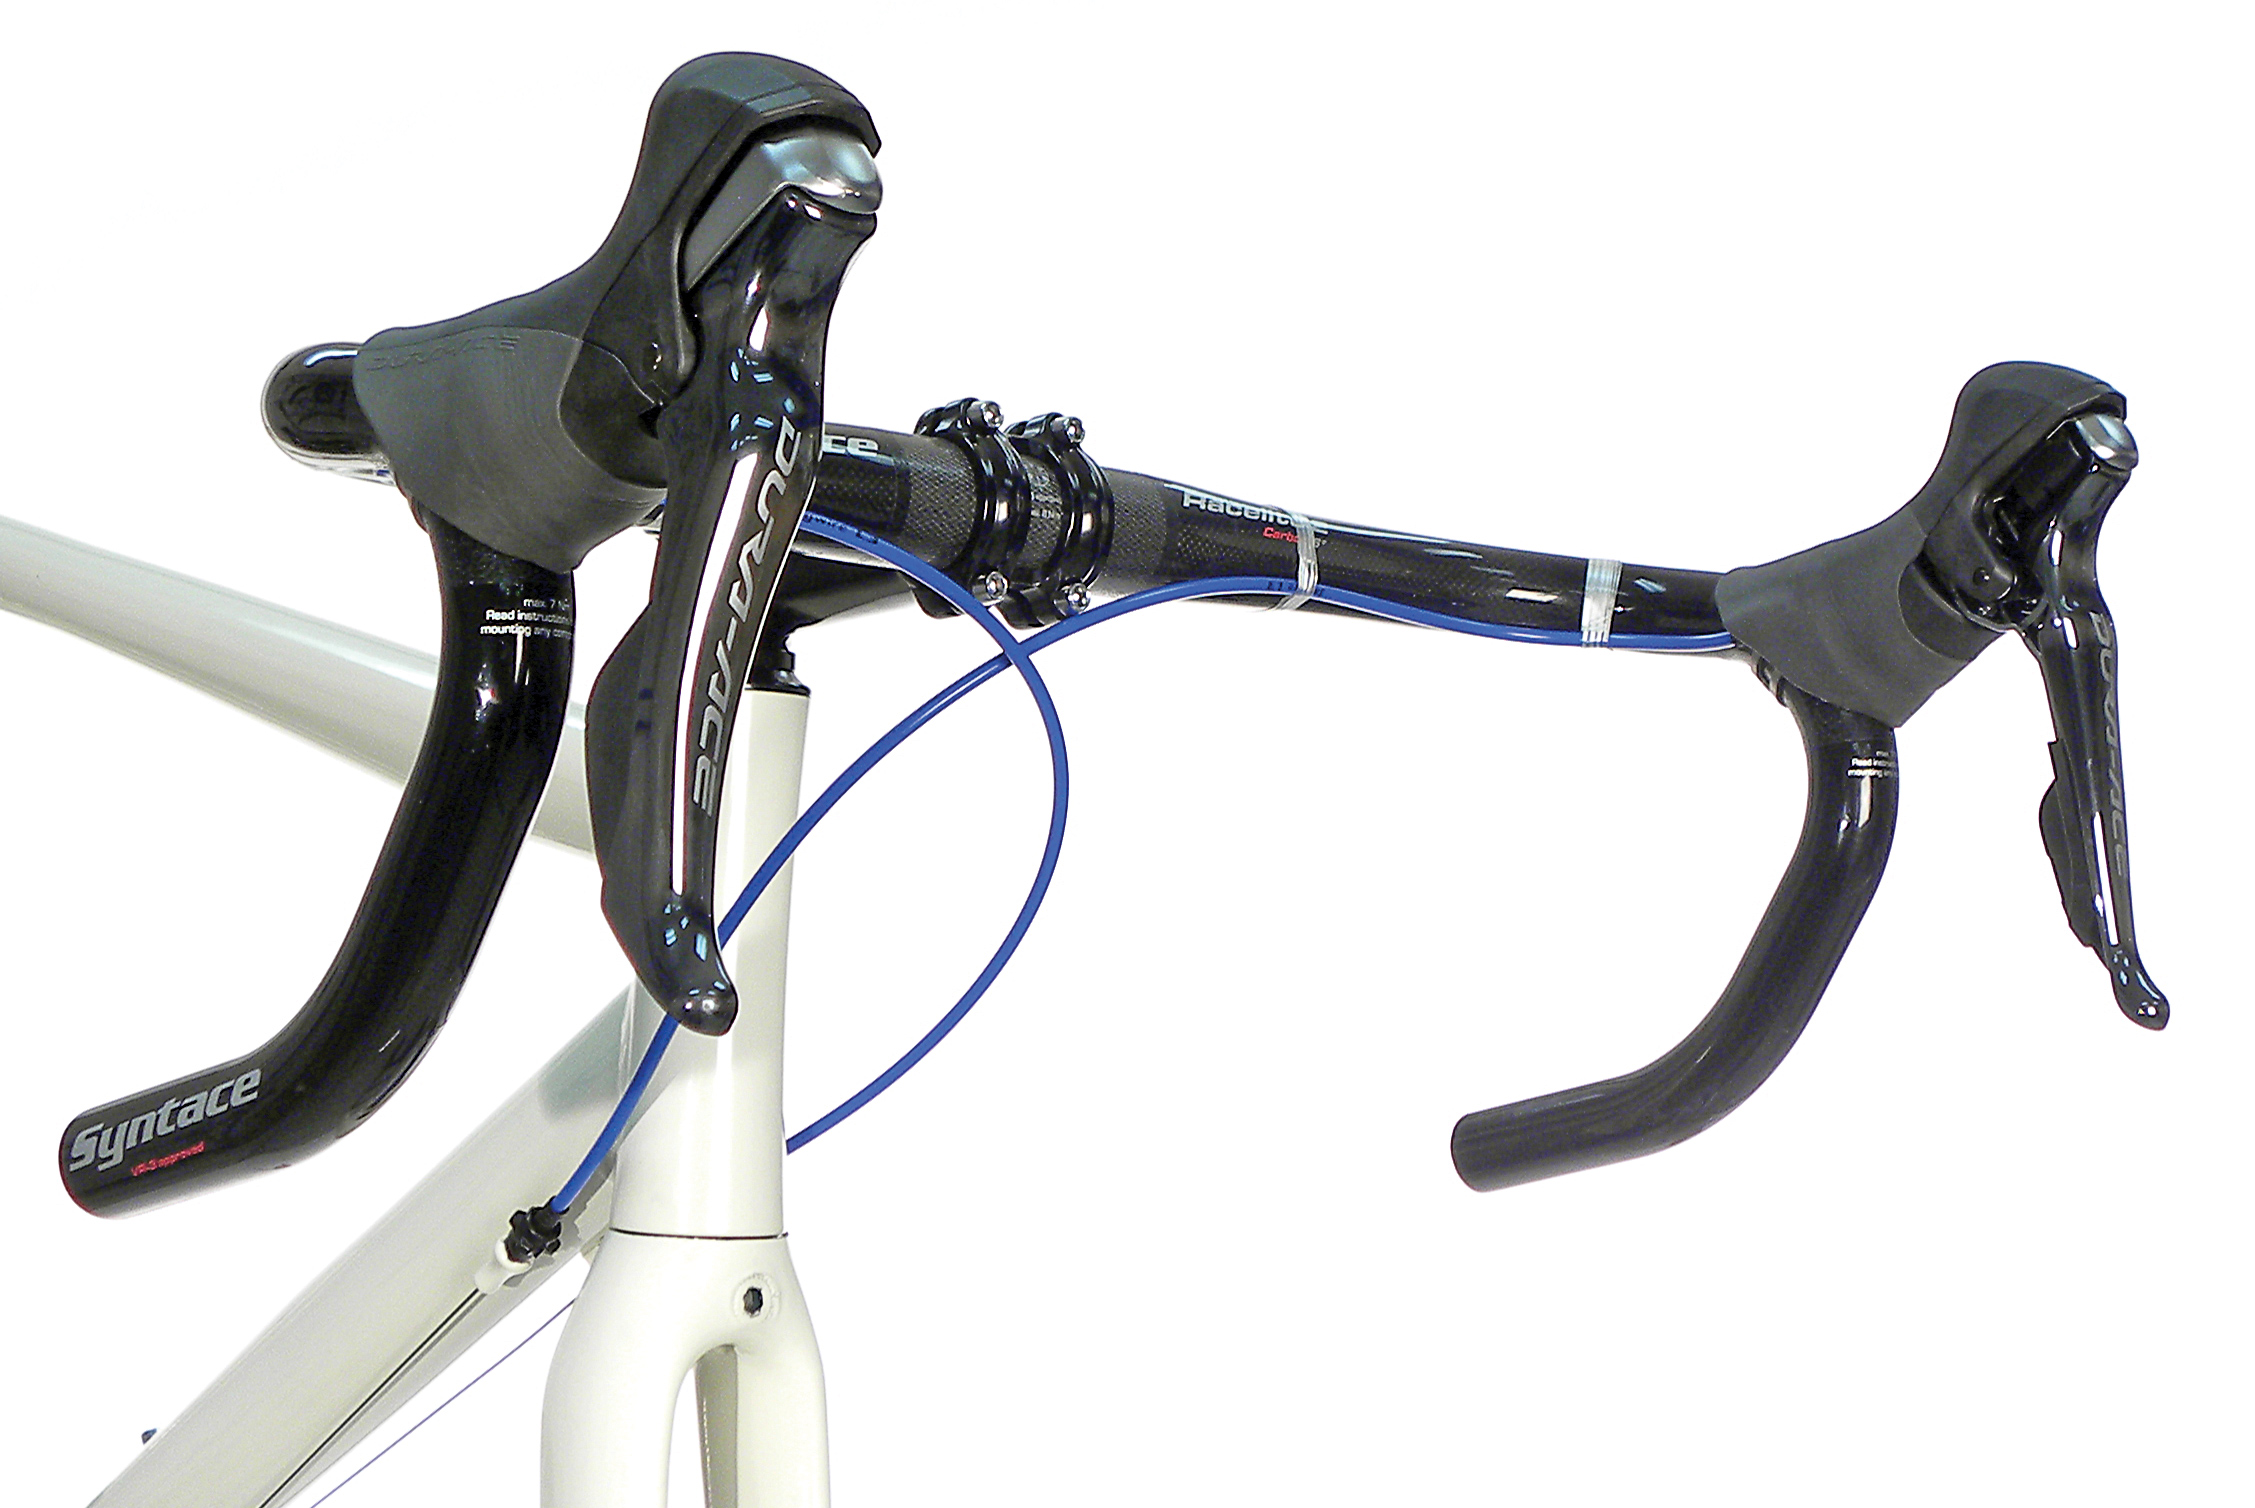 Example of crossed-over shift housing. The housings form smooth arcs that allow for full handlebar rotation without excess housing.